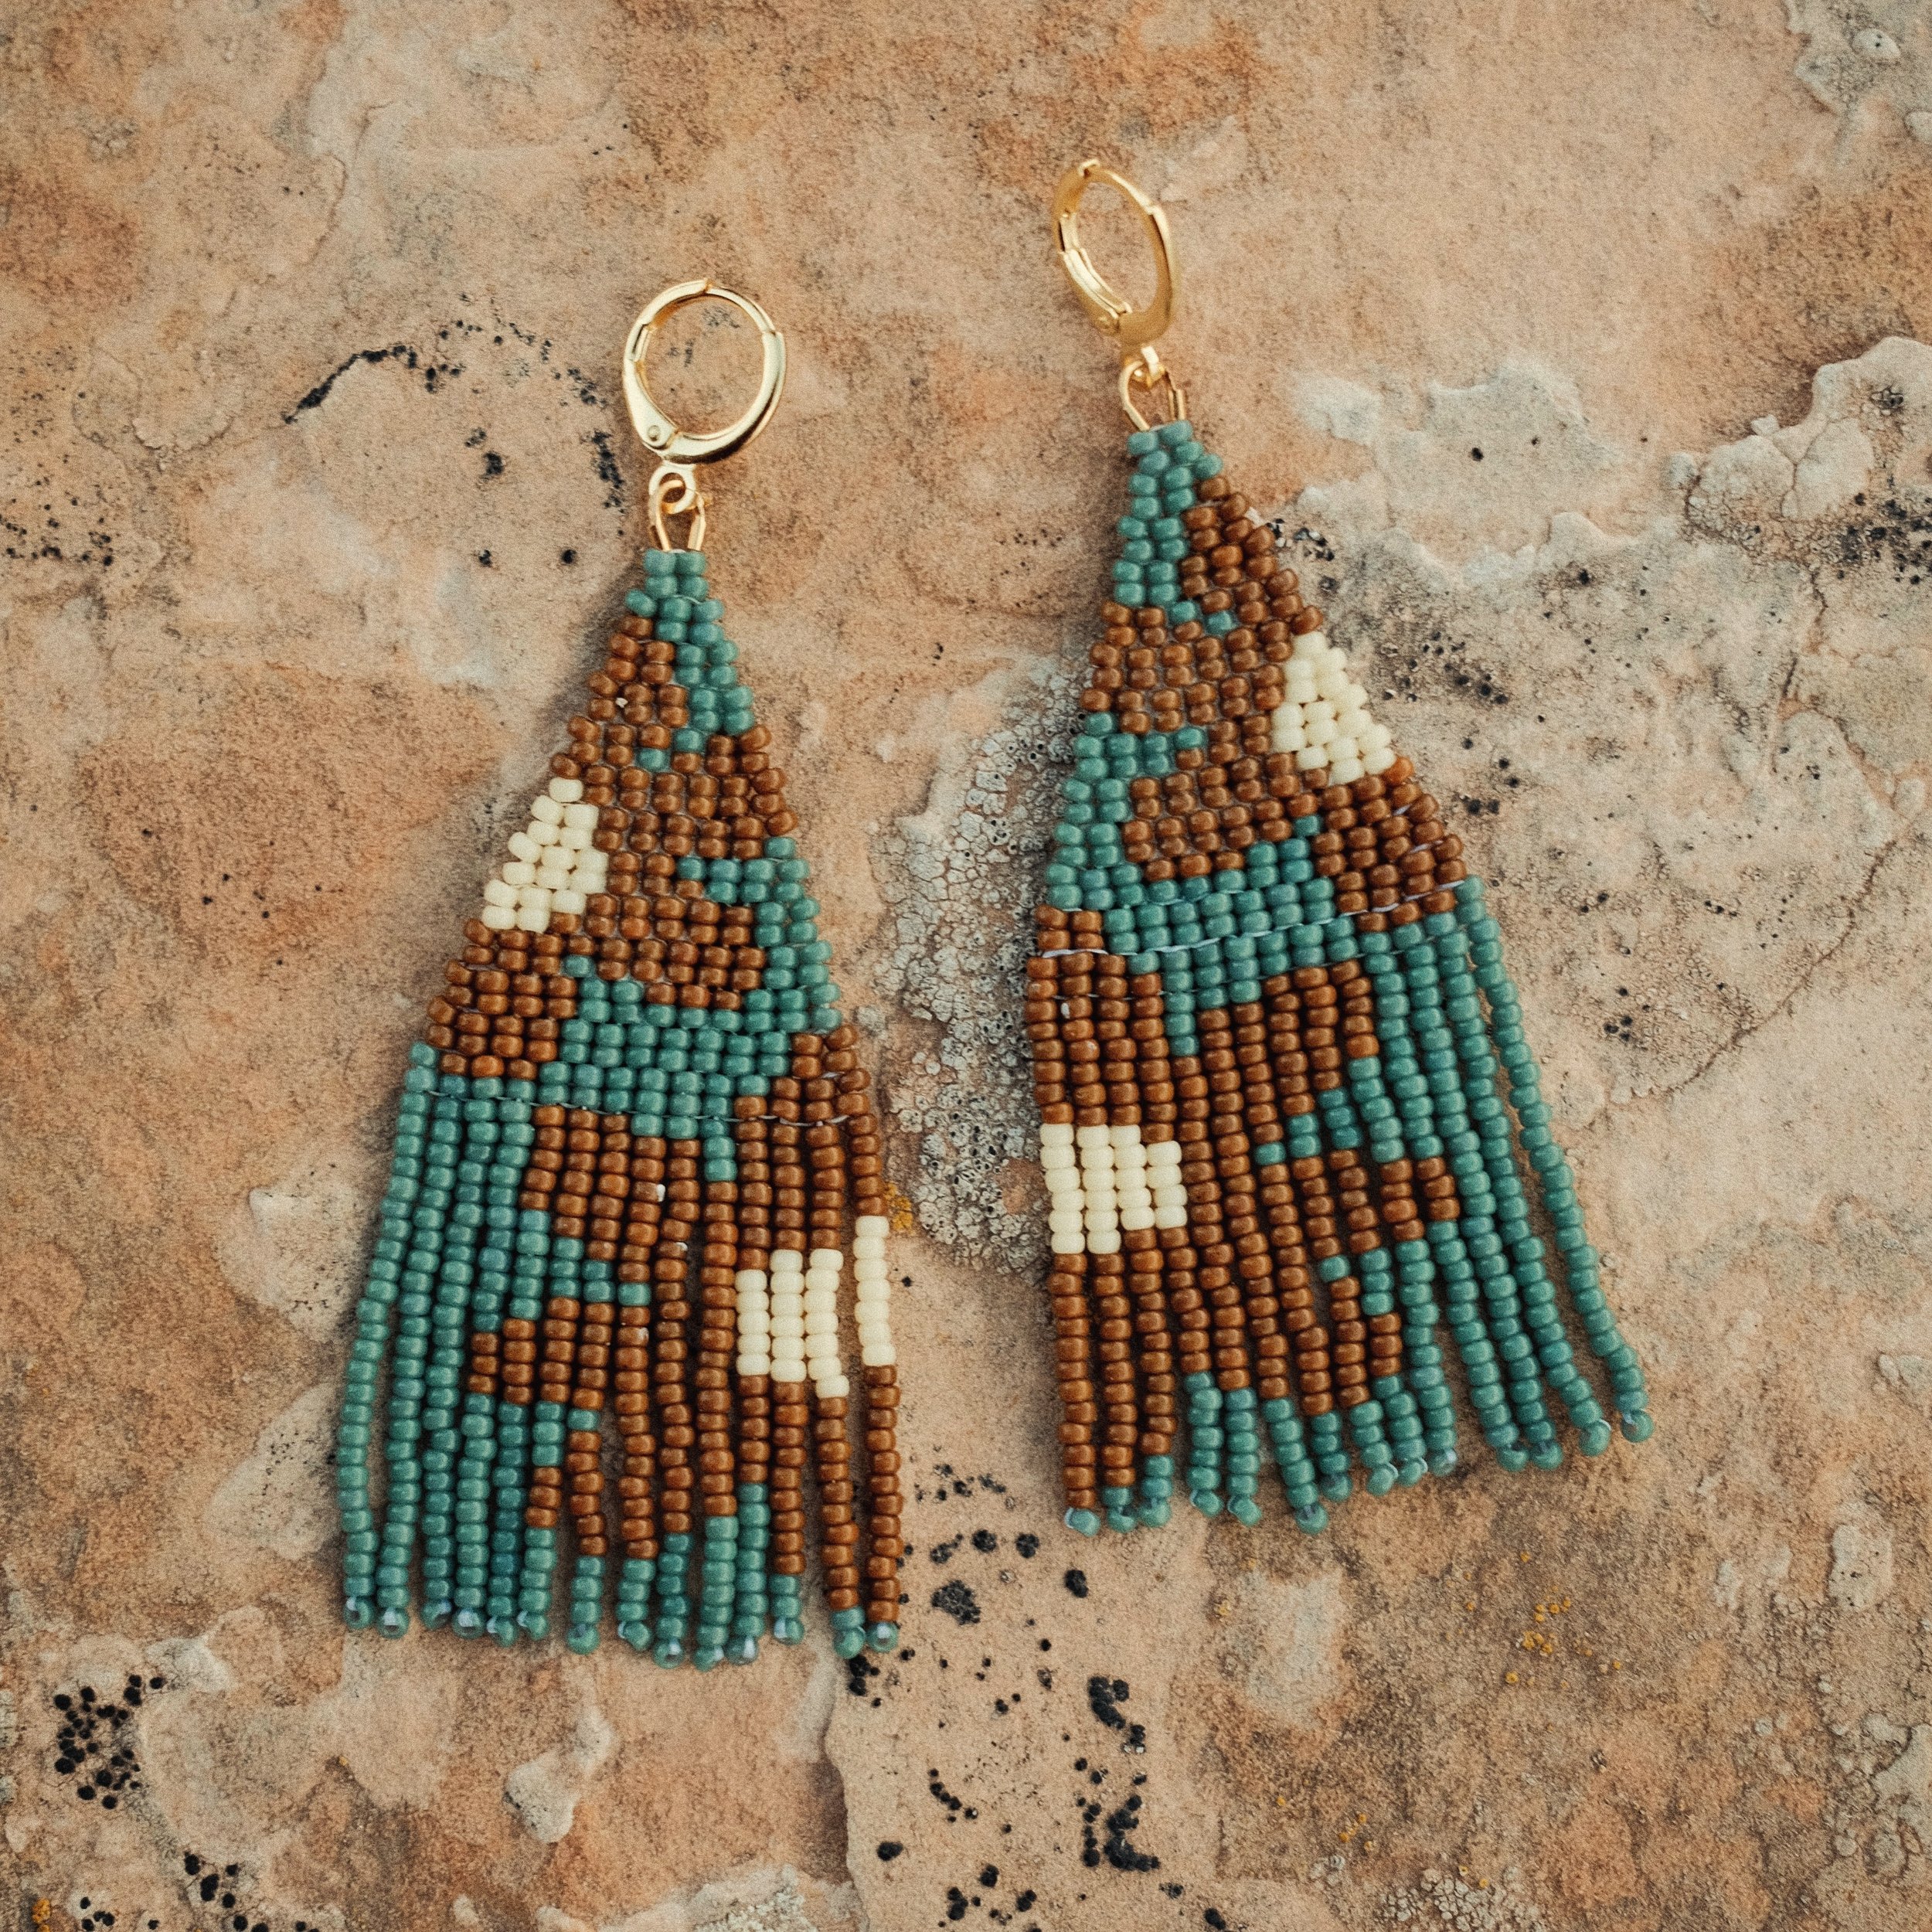 ✿ I love these and will be making them in more colors- give me your color ideas! ✿

#handmadejewelry #seedbeads #seadbeadearings #beadedearrings #desertinspired #flowerjewelry #madeinutah